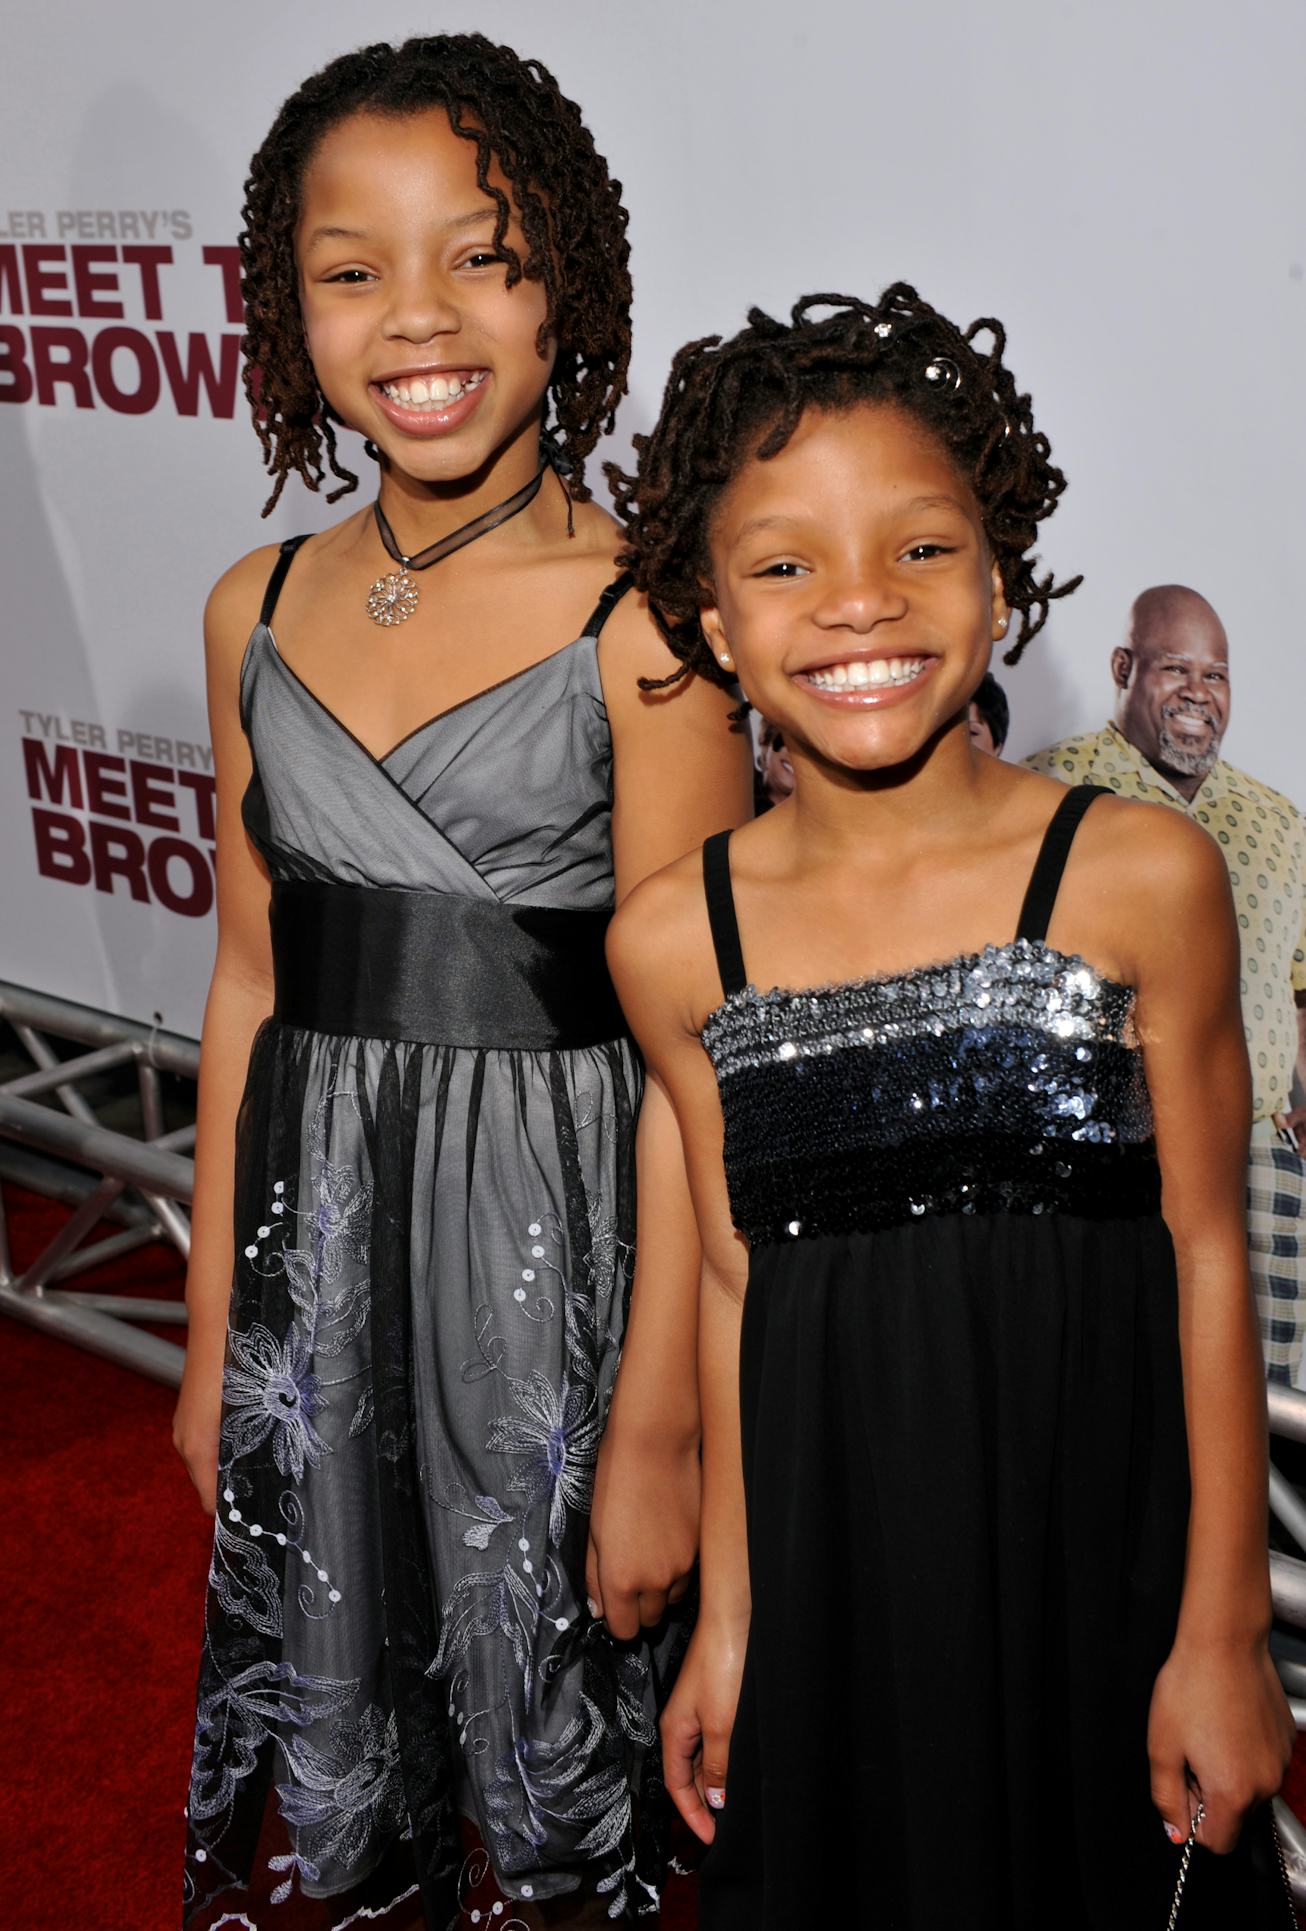 LOS ANGELES, CA - MARCH 13: Actress Chole Bailey and Halle Bailey attend the Lionsgate Premiere of T...